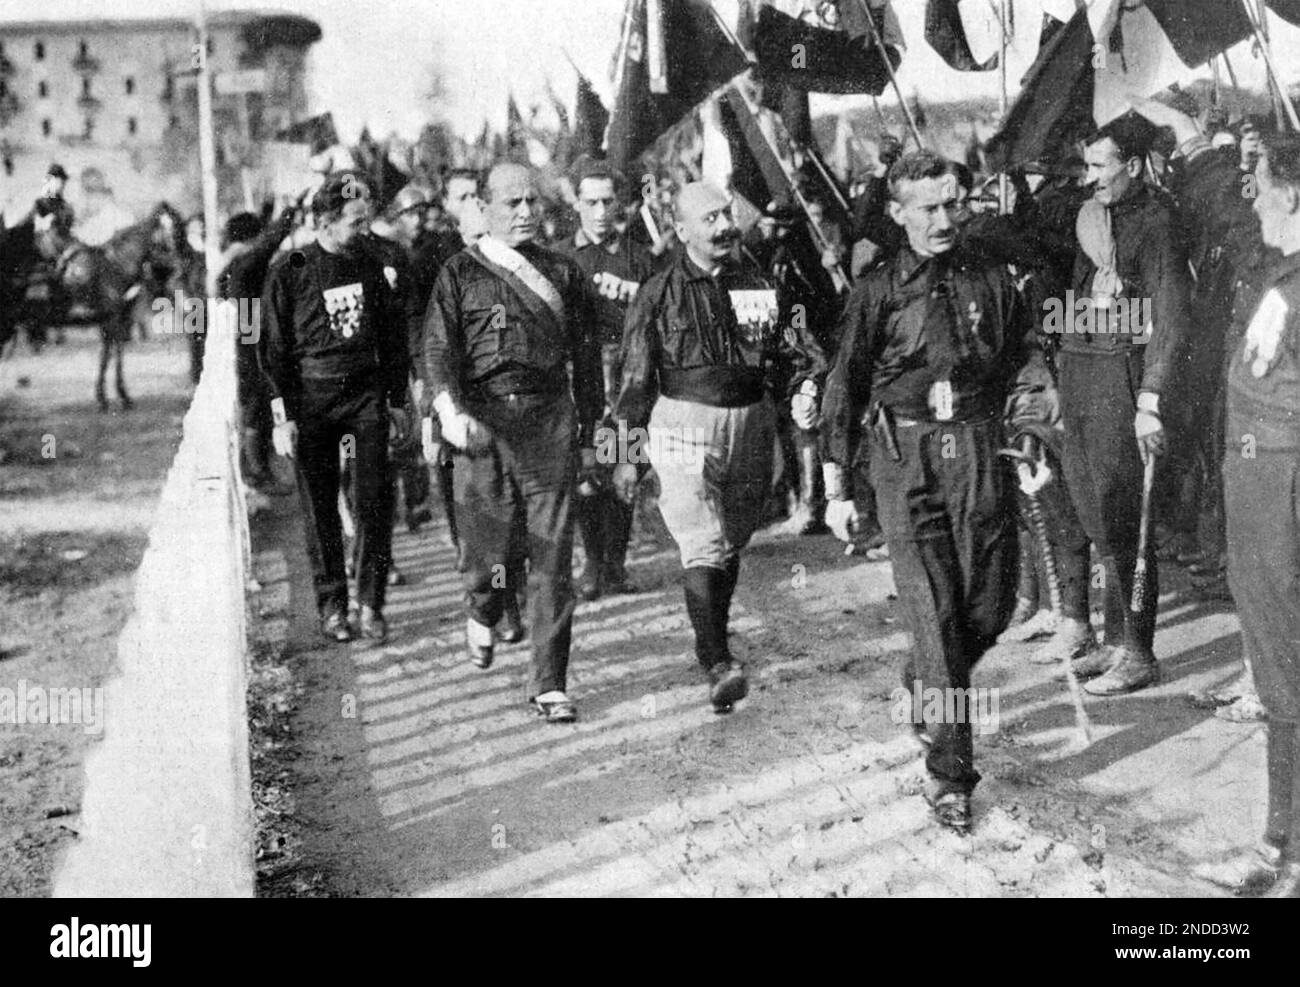 BENITO MUSSOLINI (1883-1945) Italian dictator during his March on Rome in 1922 Stock Photo